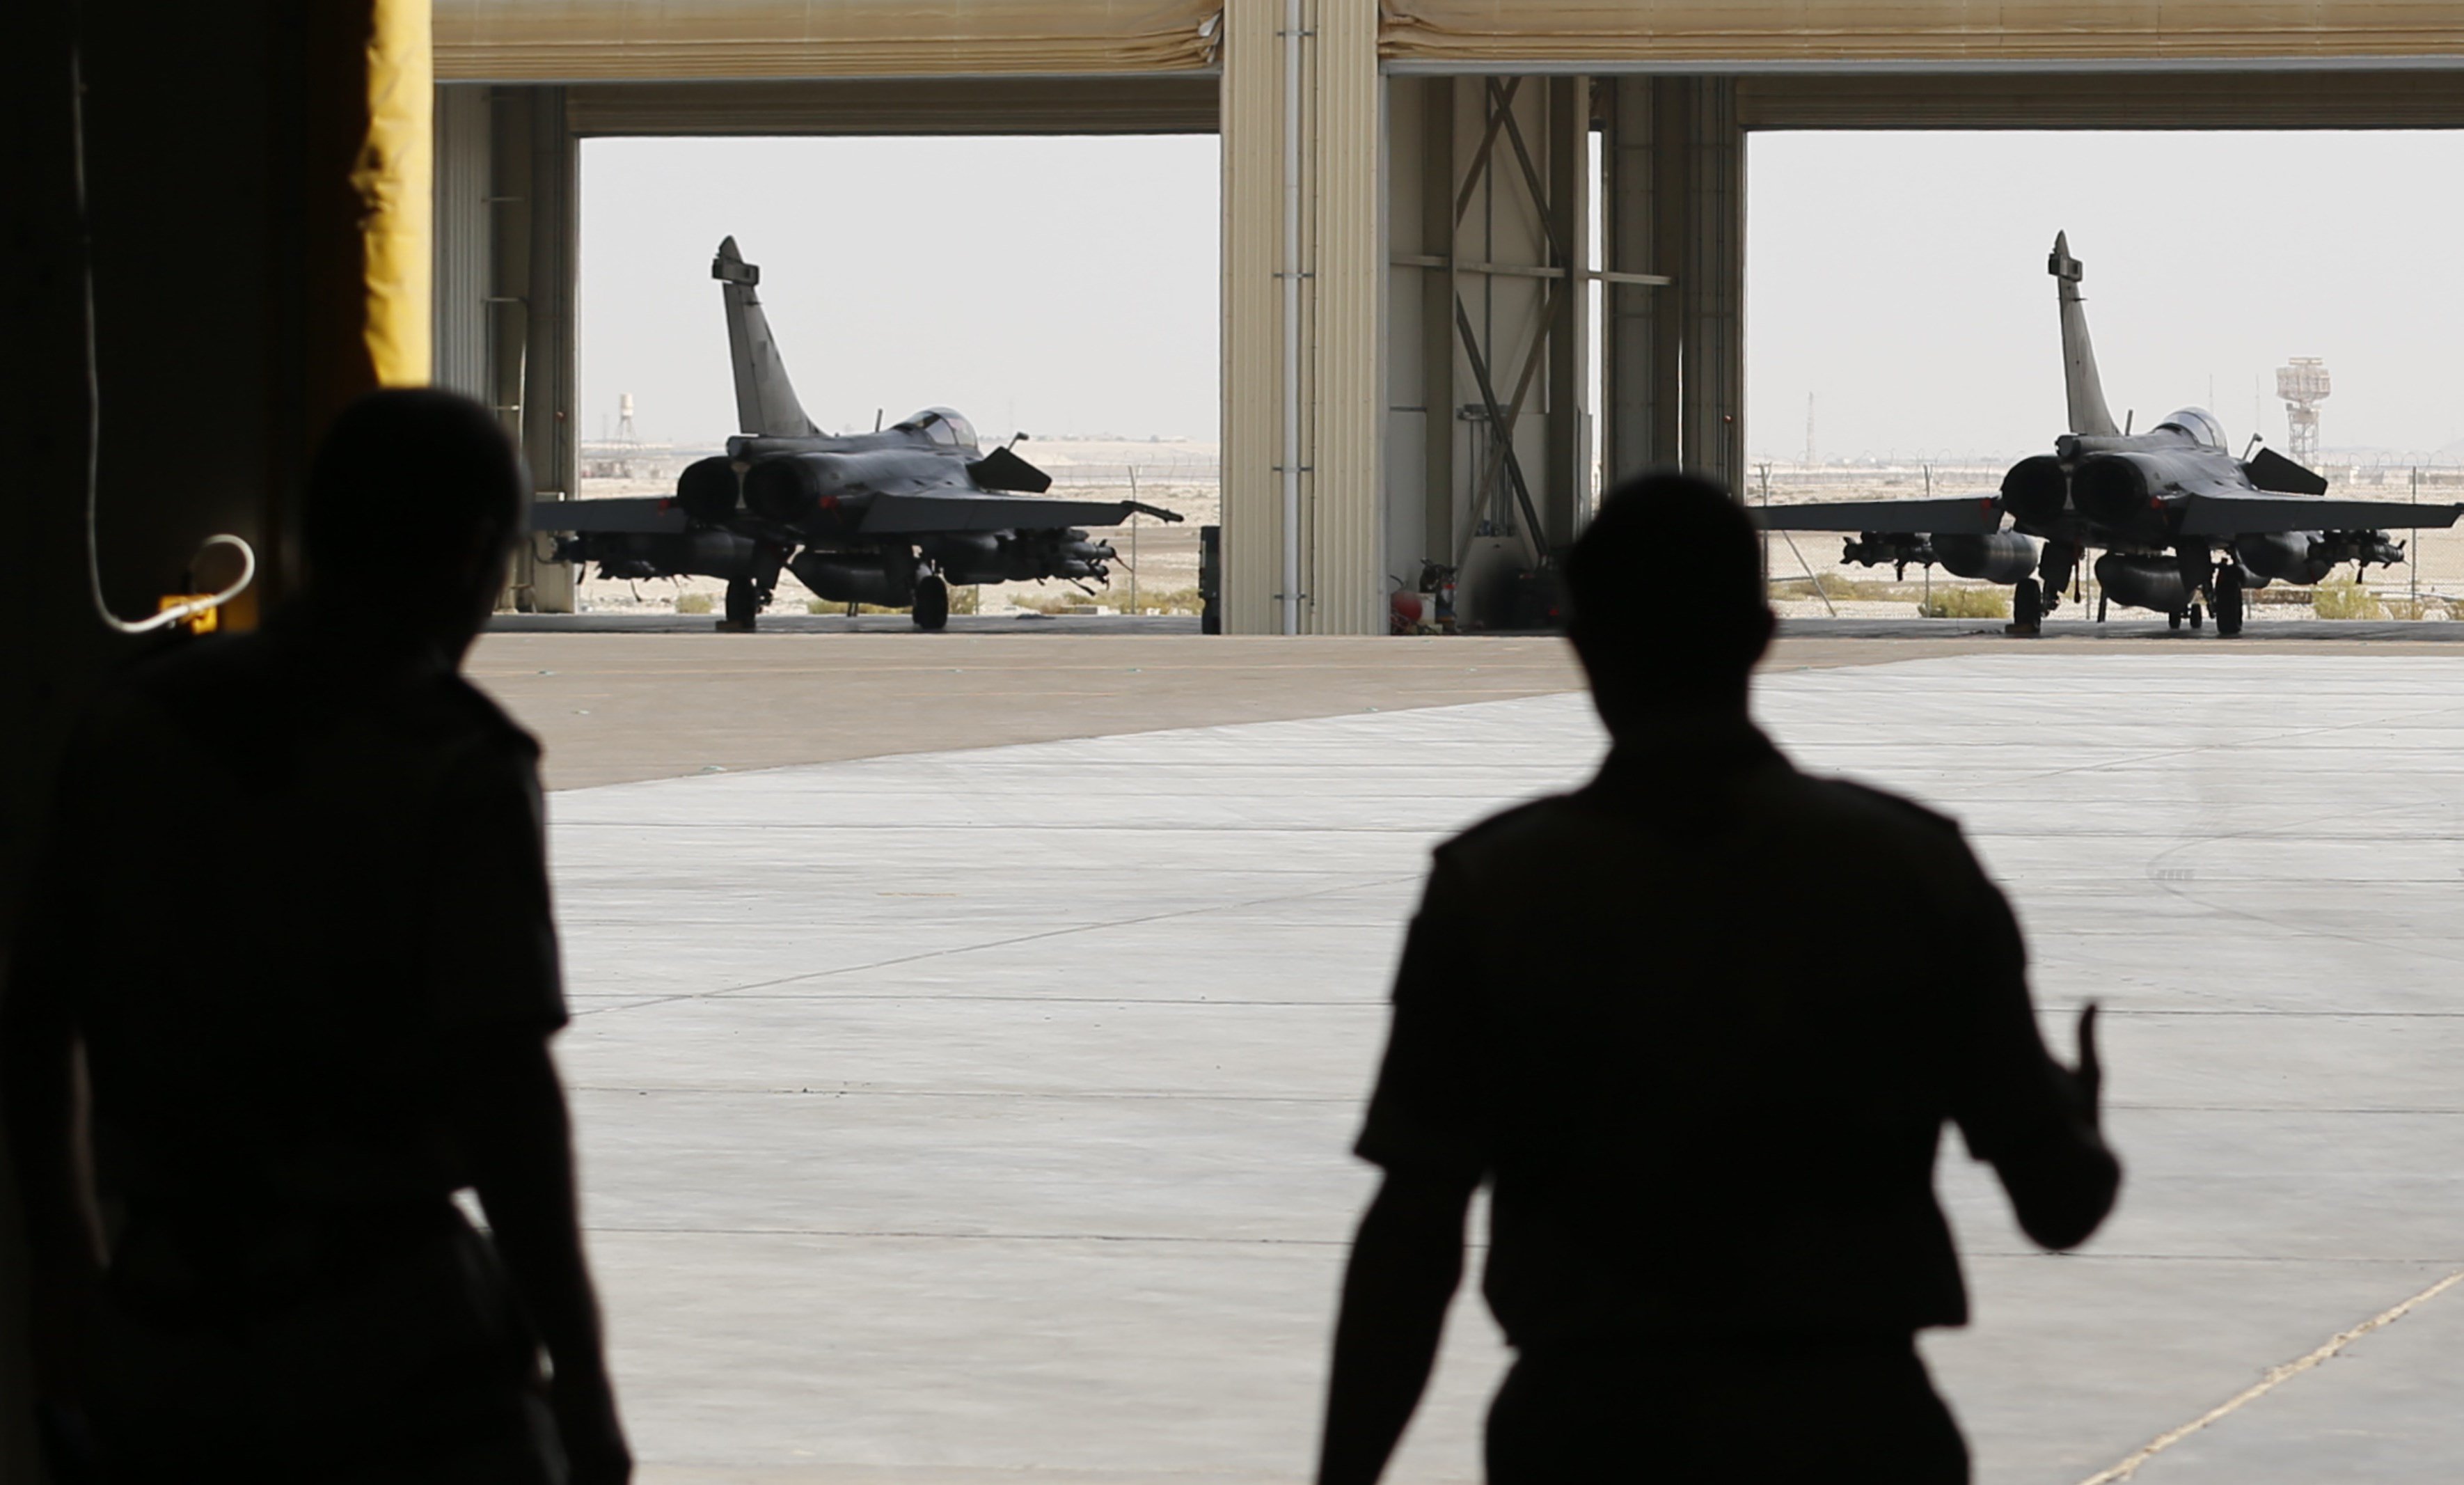 French army Rafale fighter jets at a military base at an undisclosed location in the Gulf, as the French army conducts operations against ISIS in Syria and Iraq, on Nov. 17, 2015. (Karim Sahib—AFP/Getty Images)